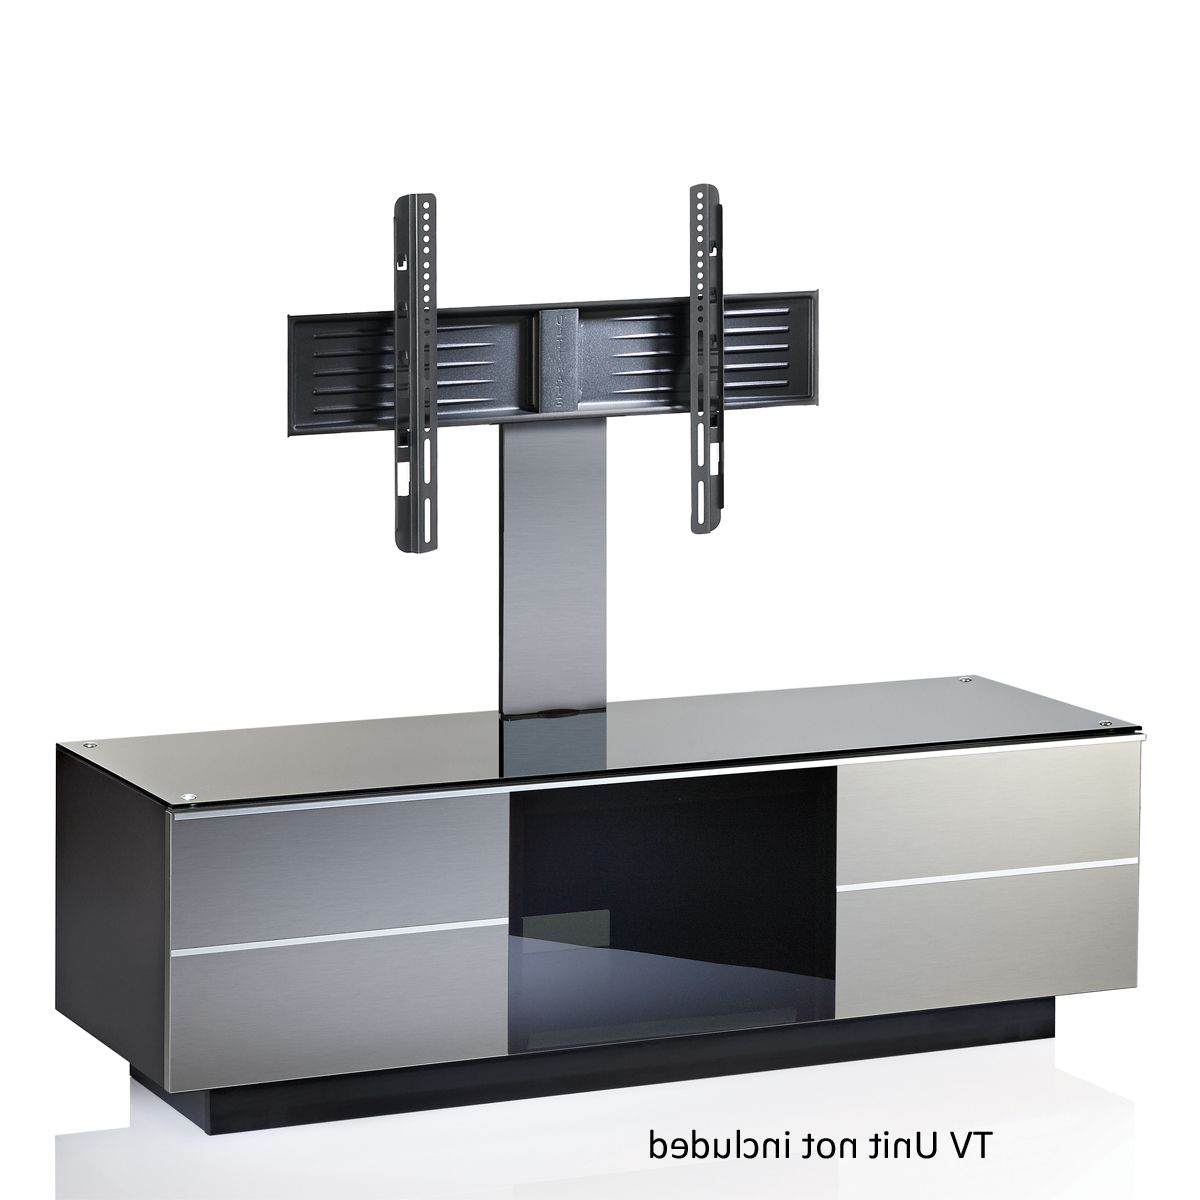 Well Known Inox G B 80 Inx Cantilever Tv Bracket,ukcf Ultimate,,uk Cf Ultimate Pertaining To Cheap Cantilever Tv Stands (View 19 of 20)